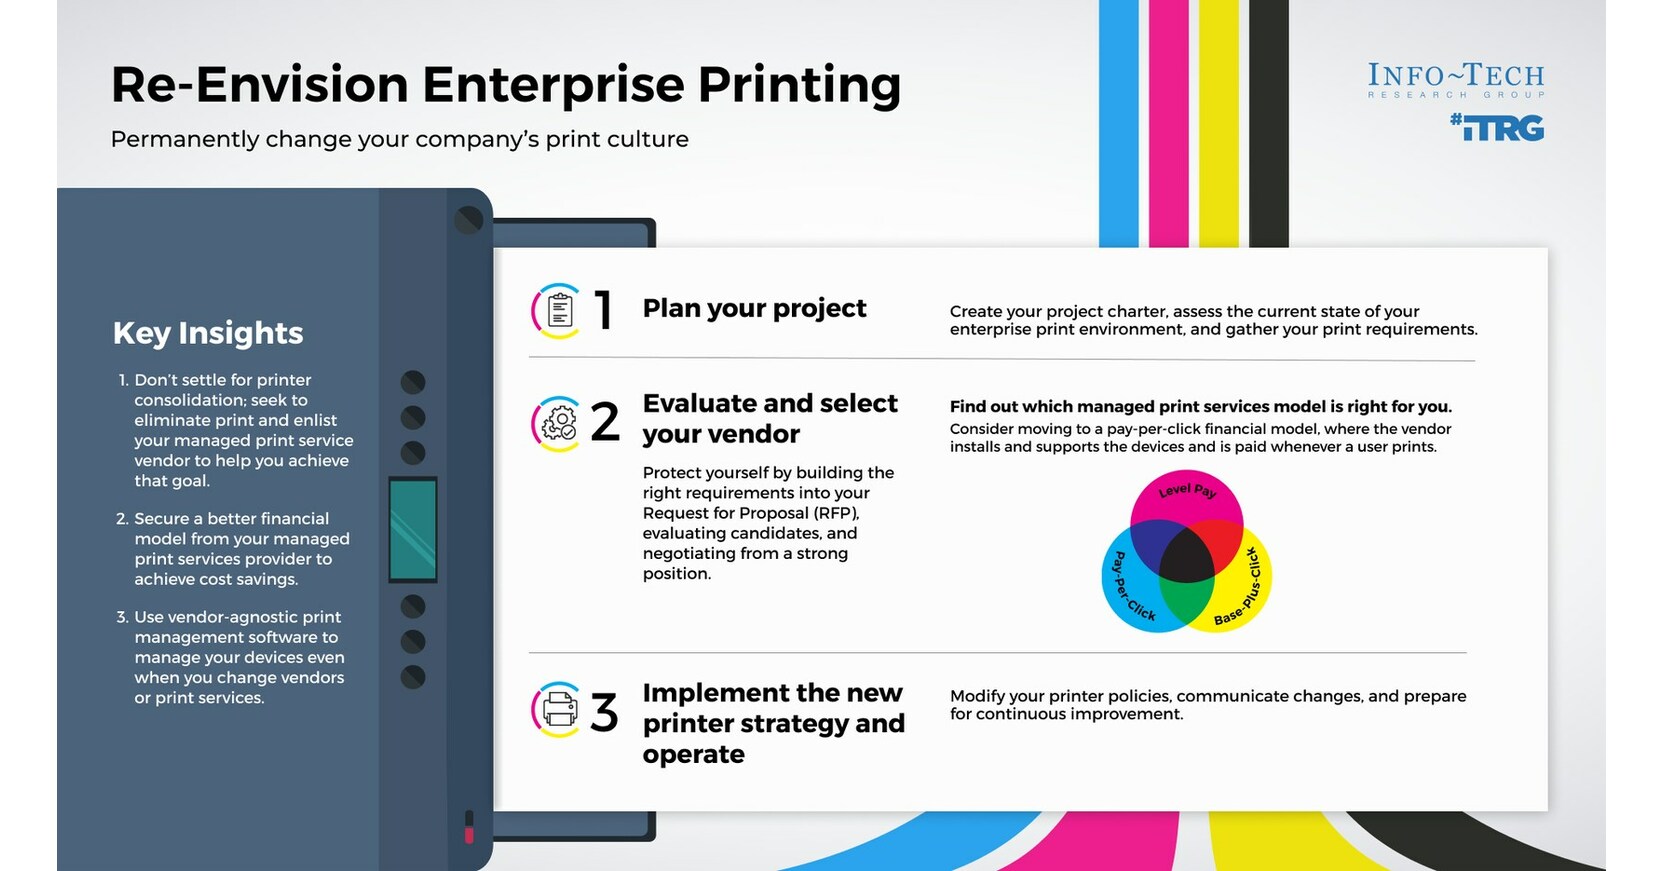 Amid Economic Challenges, Enterprise Printing Is a Hidden Expense That Business Leaders Can Eliminate, Info-Tech Research Group